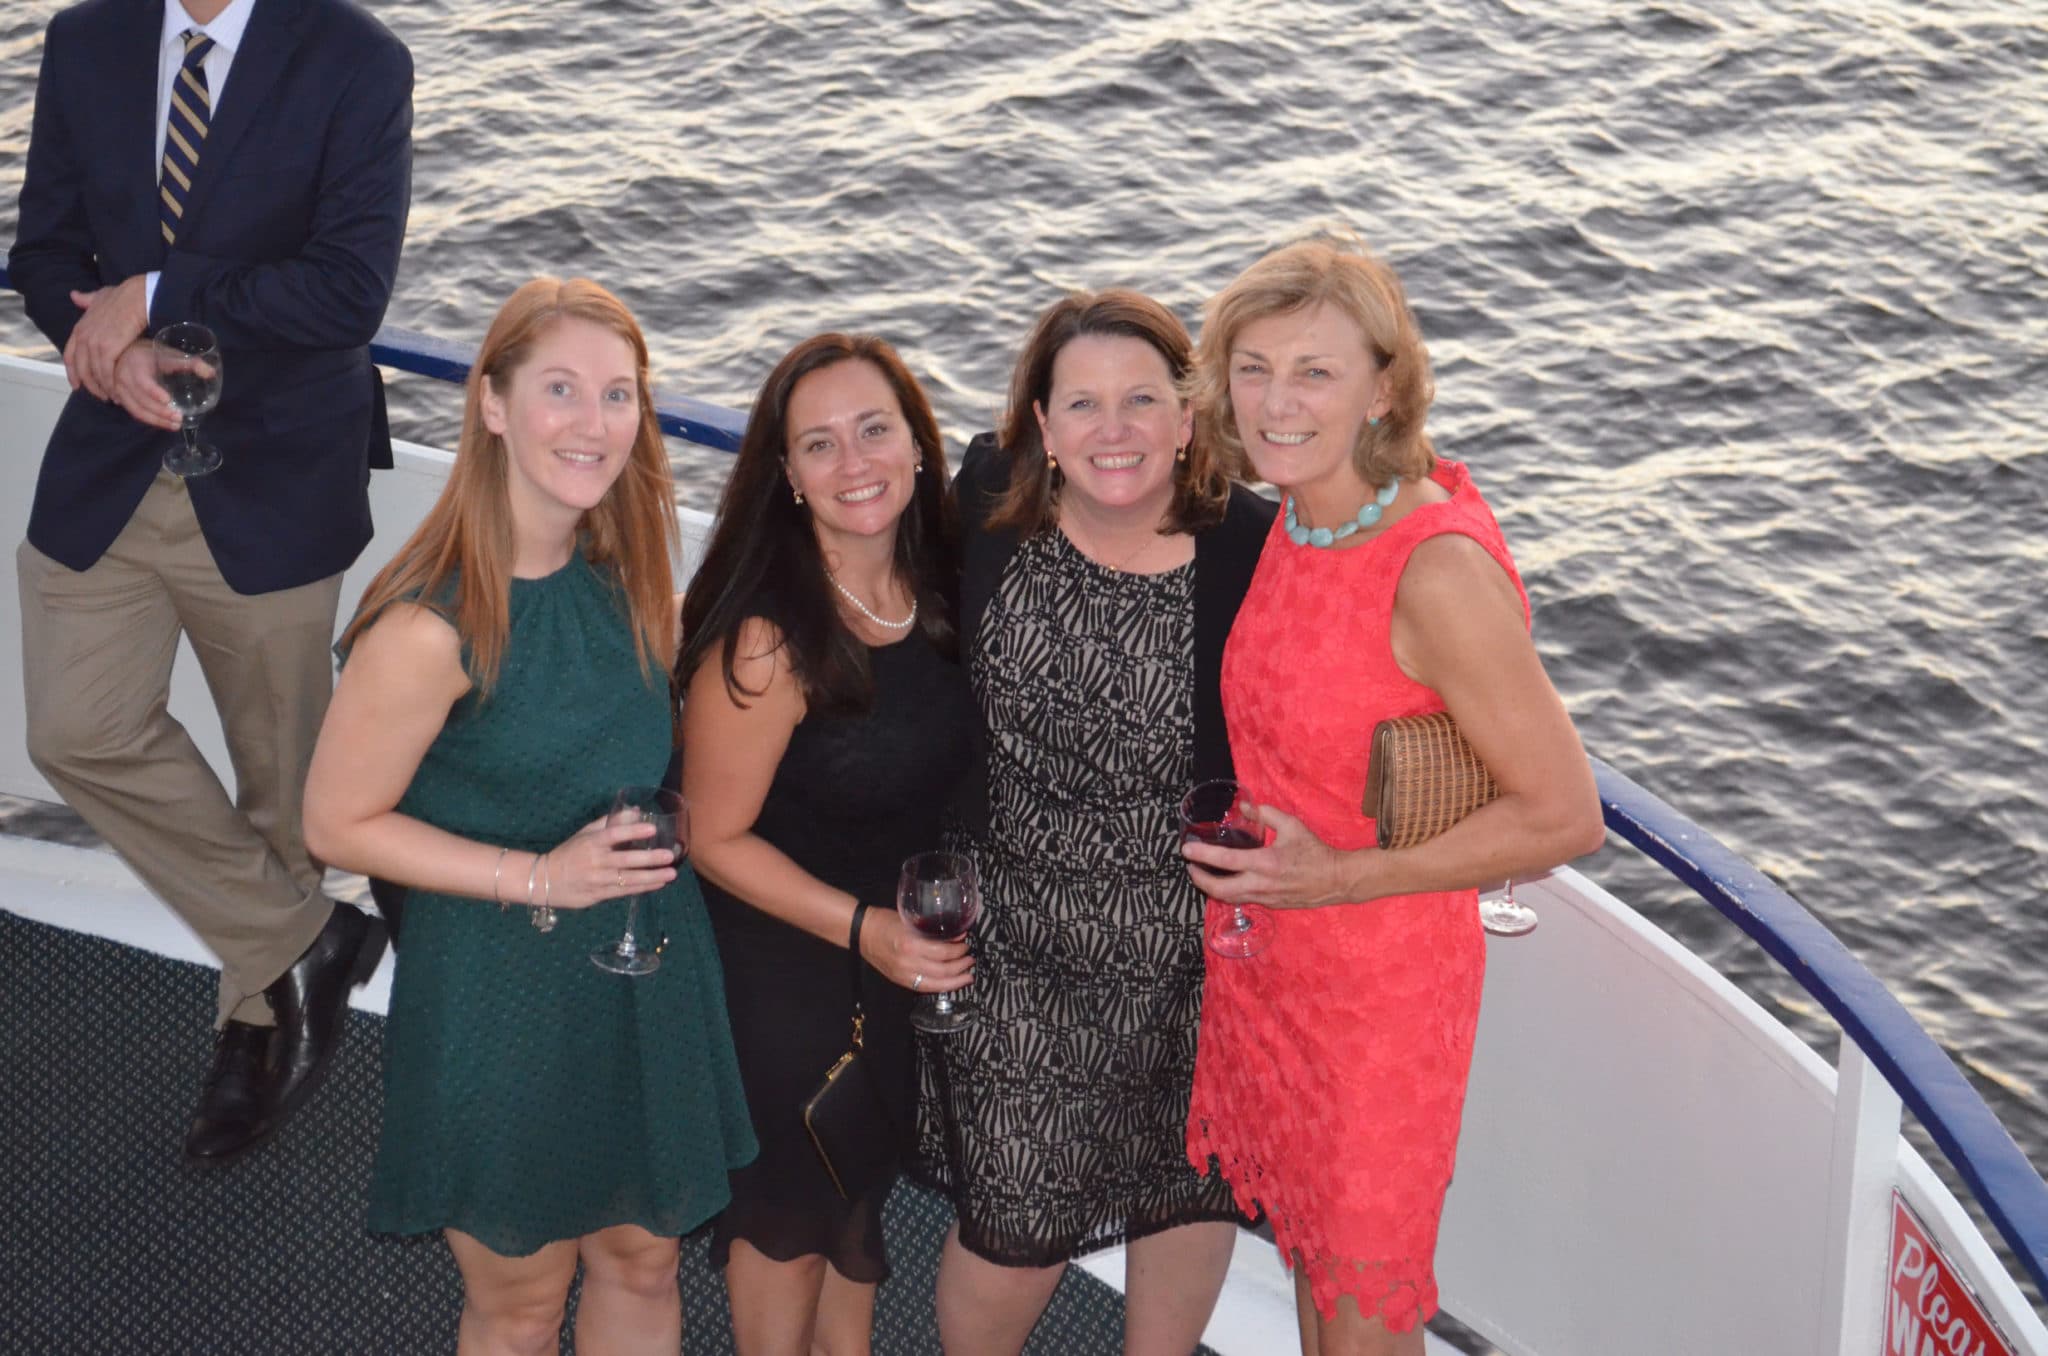 On September 24-27, 2017 Community Options hosted its 11th Annual iMatter Conference A Meaningful Life: Conference on Supported Employment at the Francis Marion Hotel in Charleston, SC. Awards Dinner cruise on Tuesday, September 26th aboard the Spirit of the Lowcountry on the Charleston, SC Harbor.